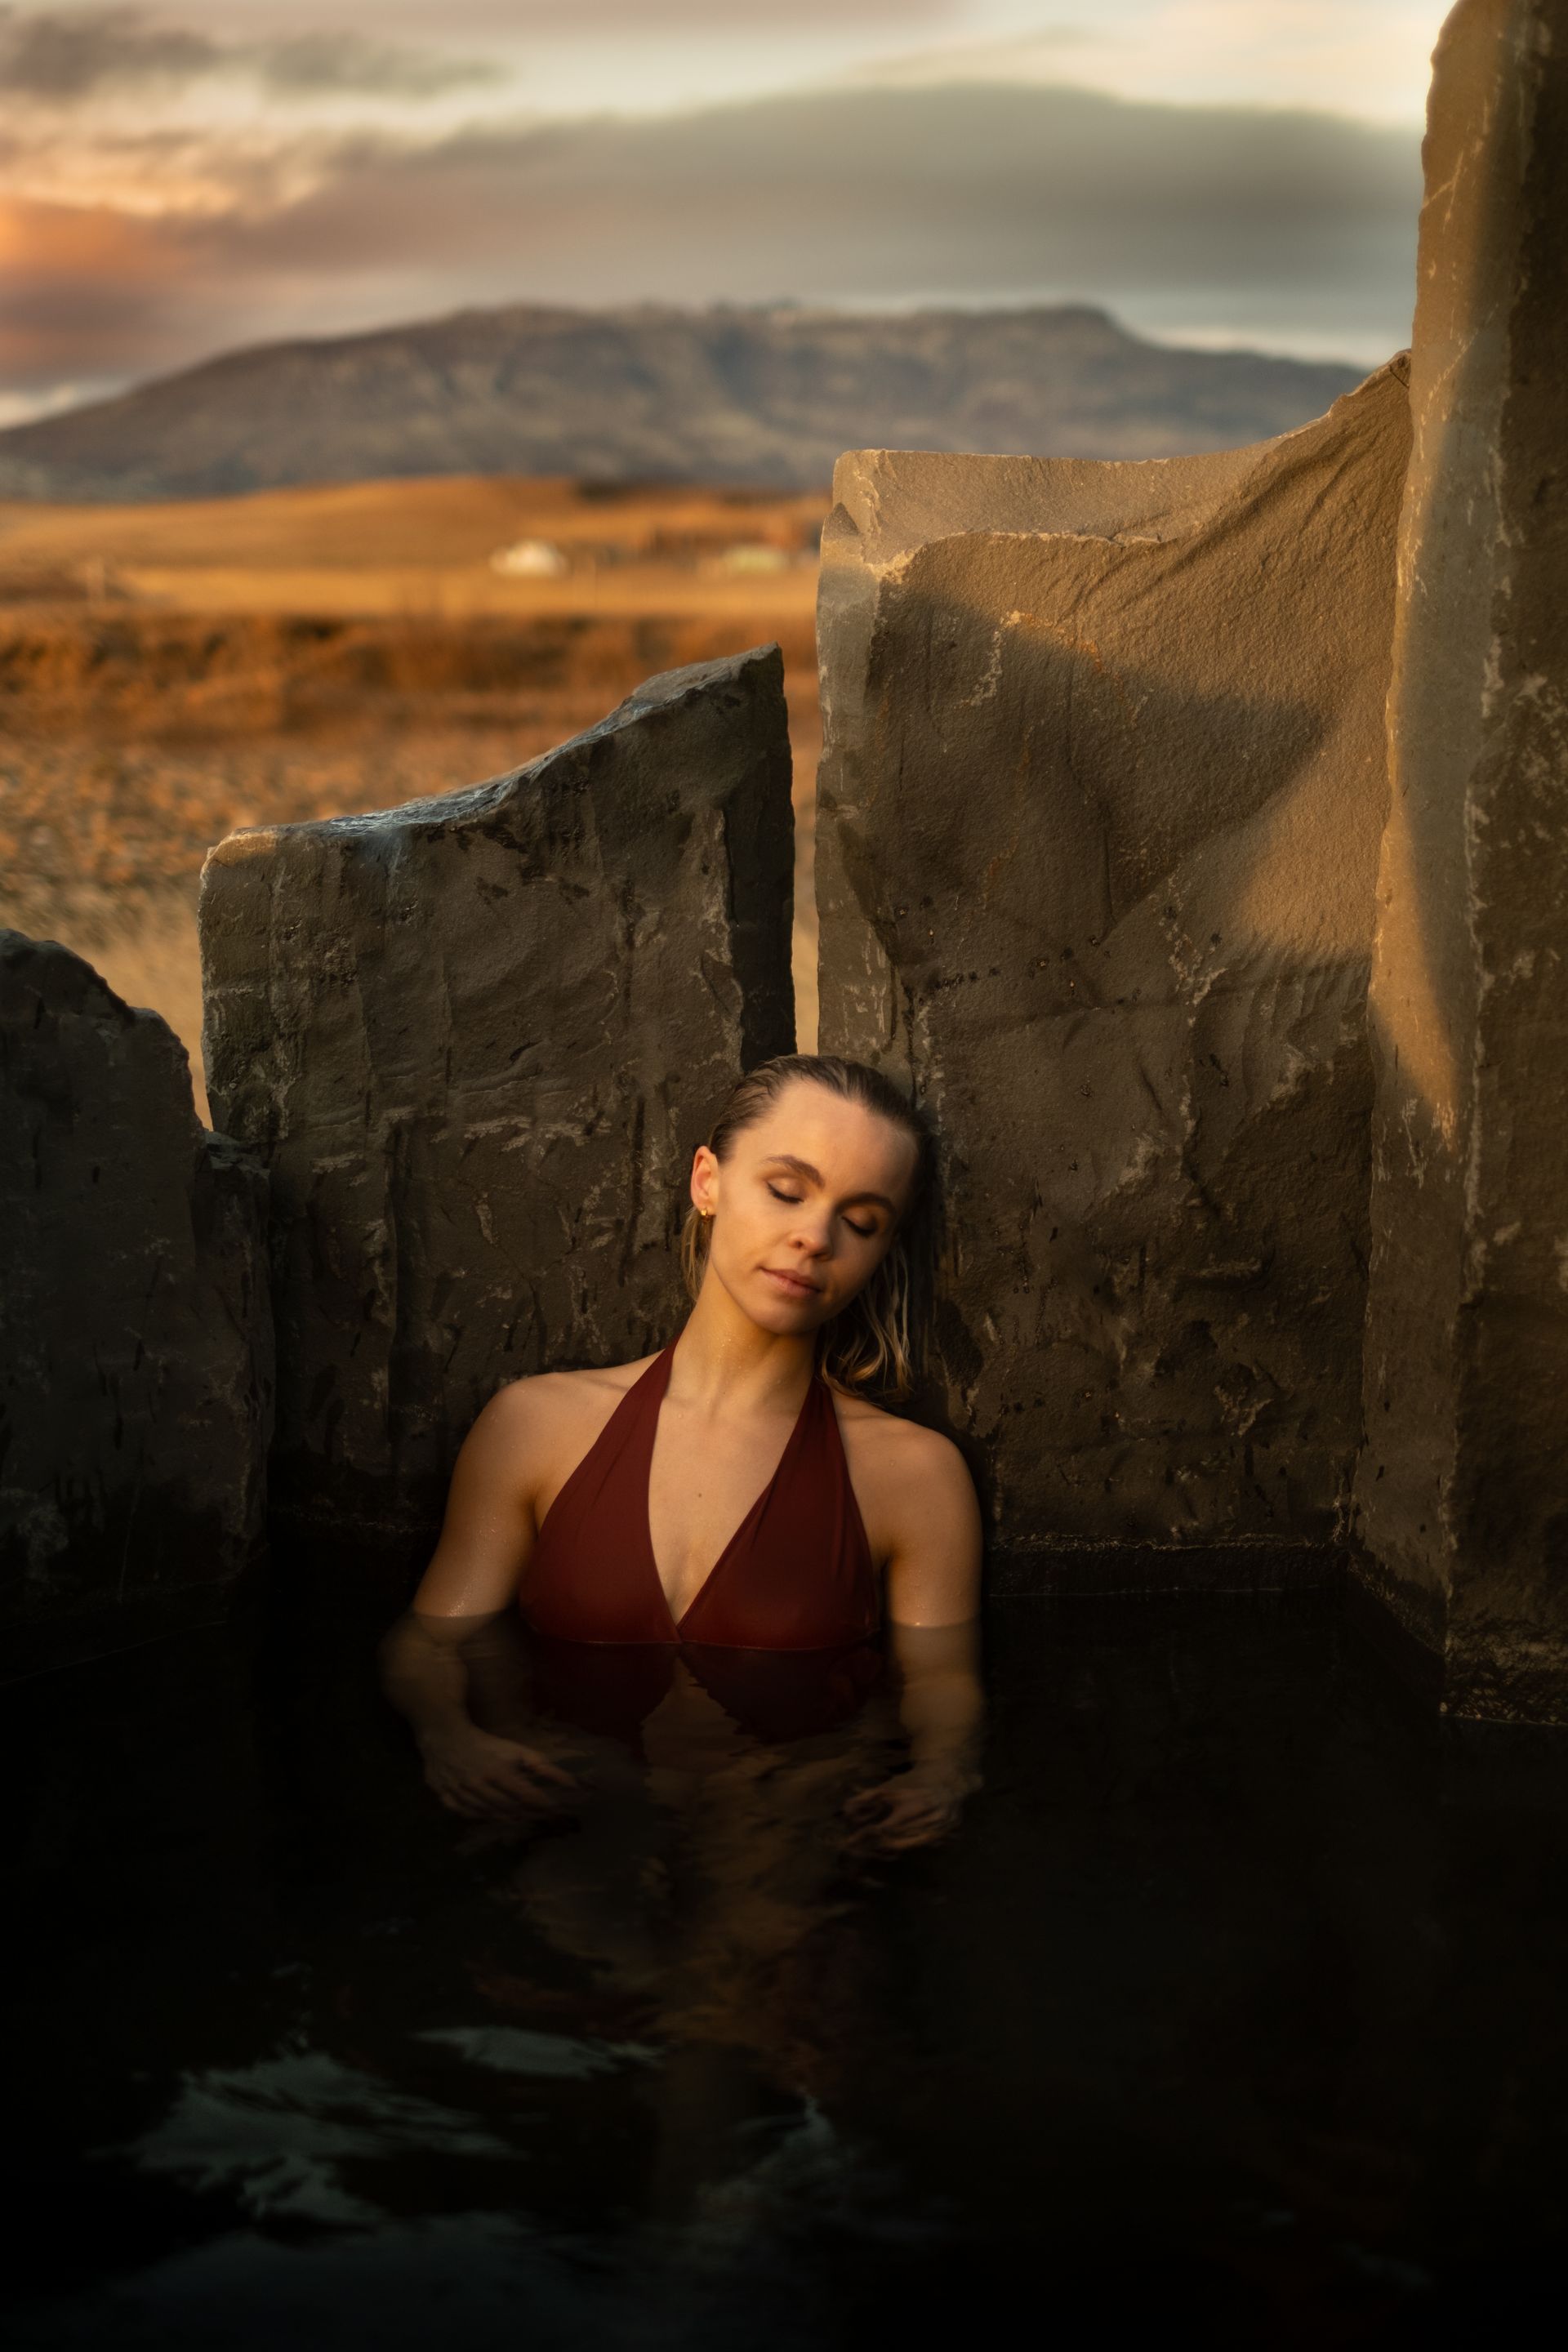 a woman is sitting in torfhus basalt stone hot pool of water surrounded by rocks .